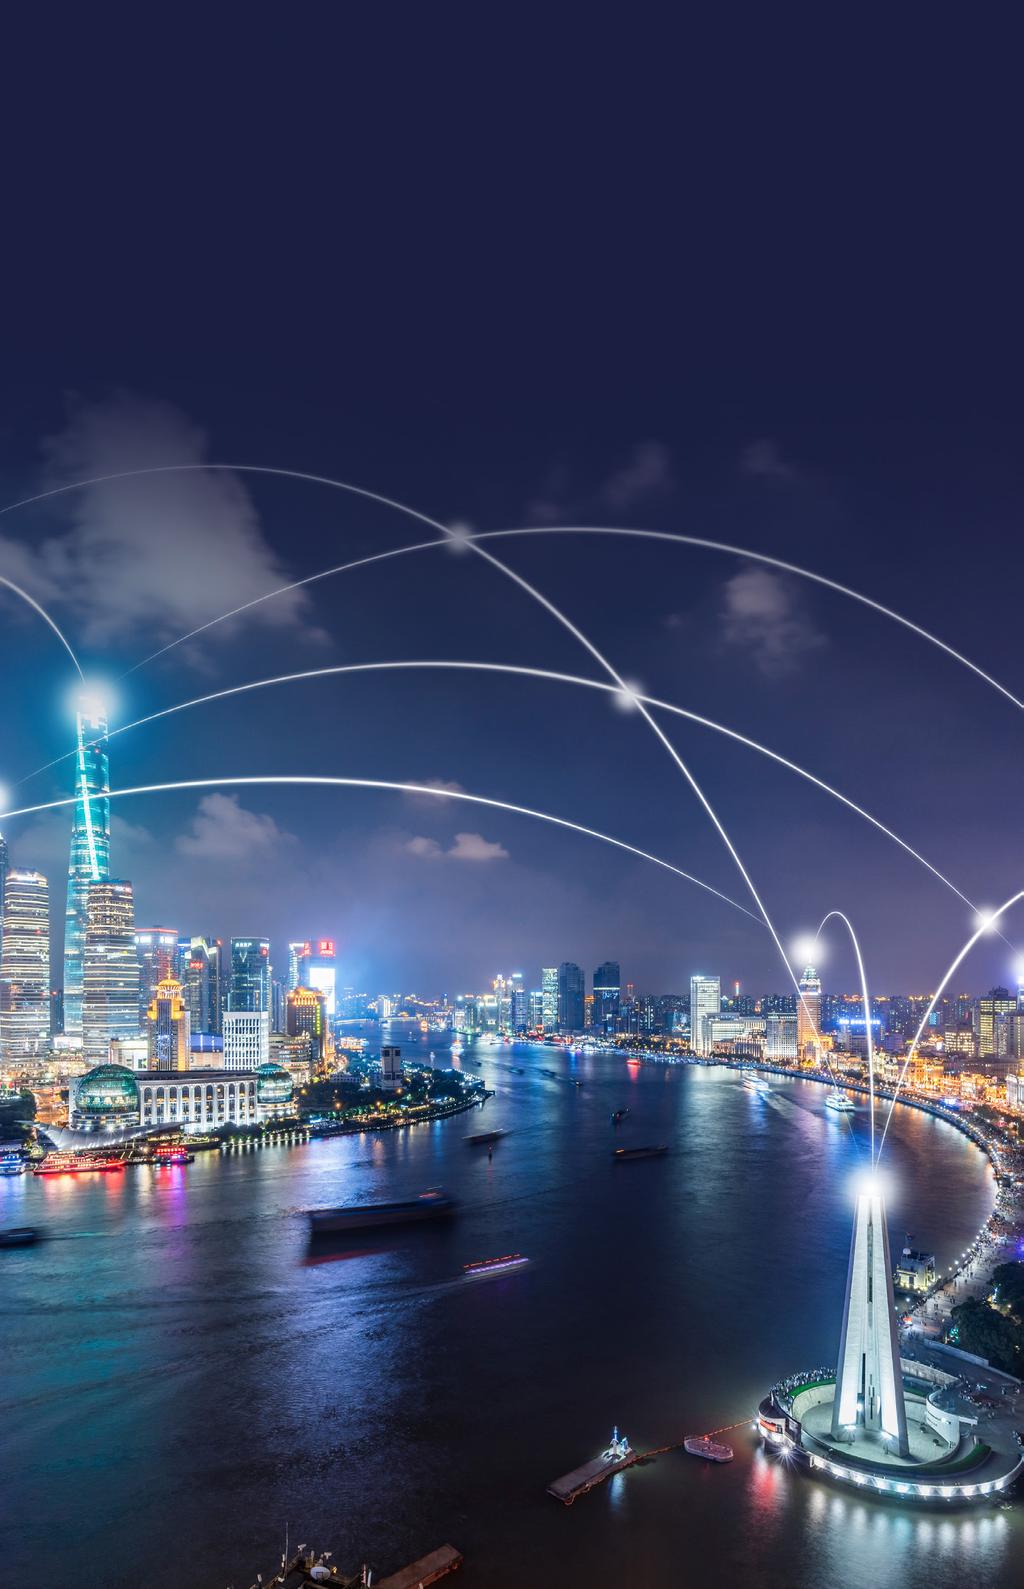 5. Global presence Well-established cloud communications providers should have fully geo-redundant distributed networks that offer full functionality in any region.